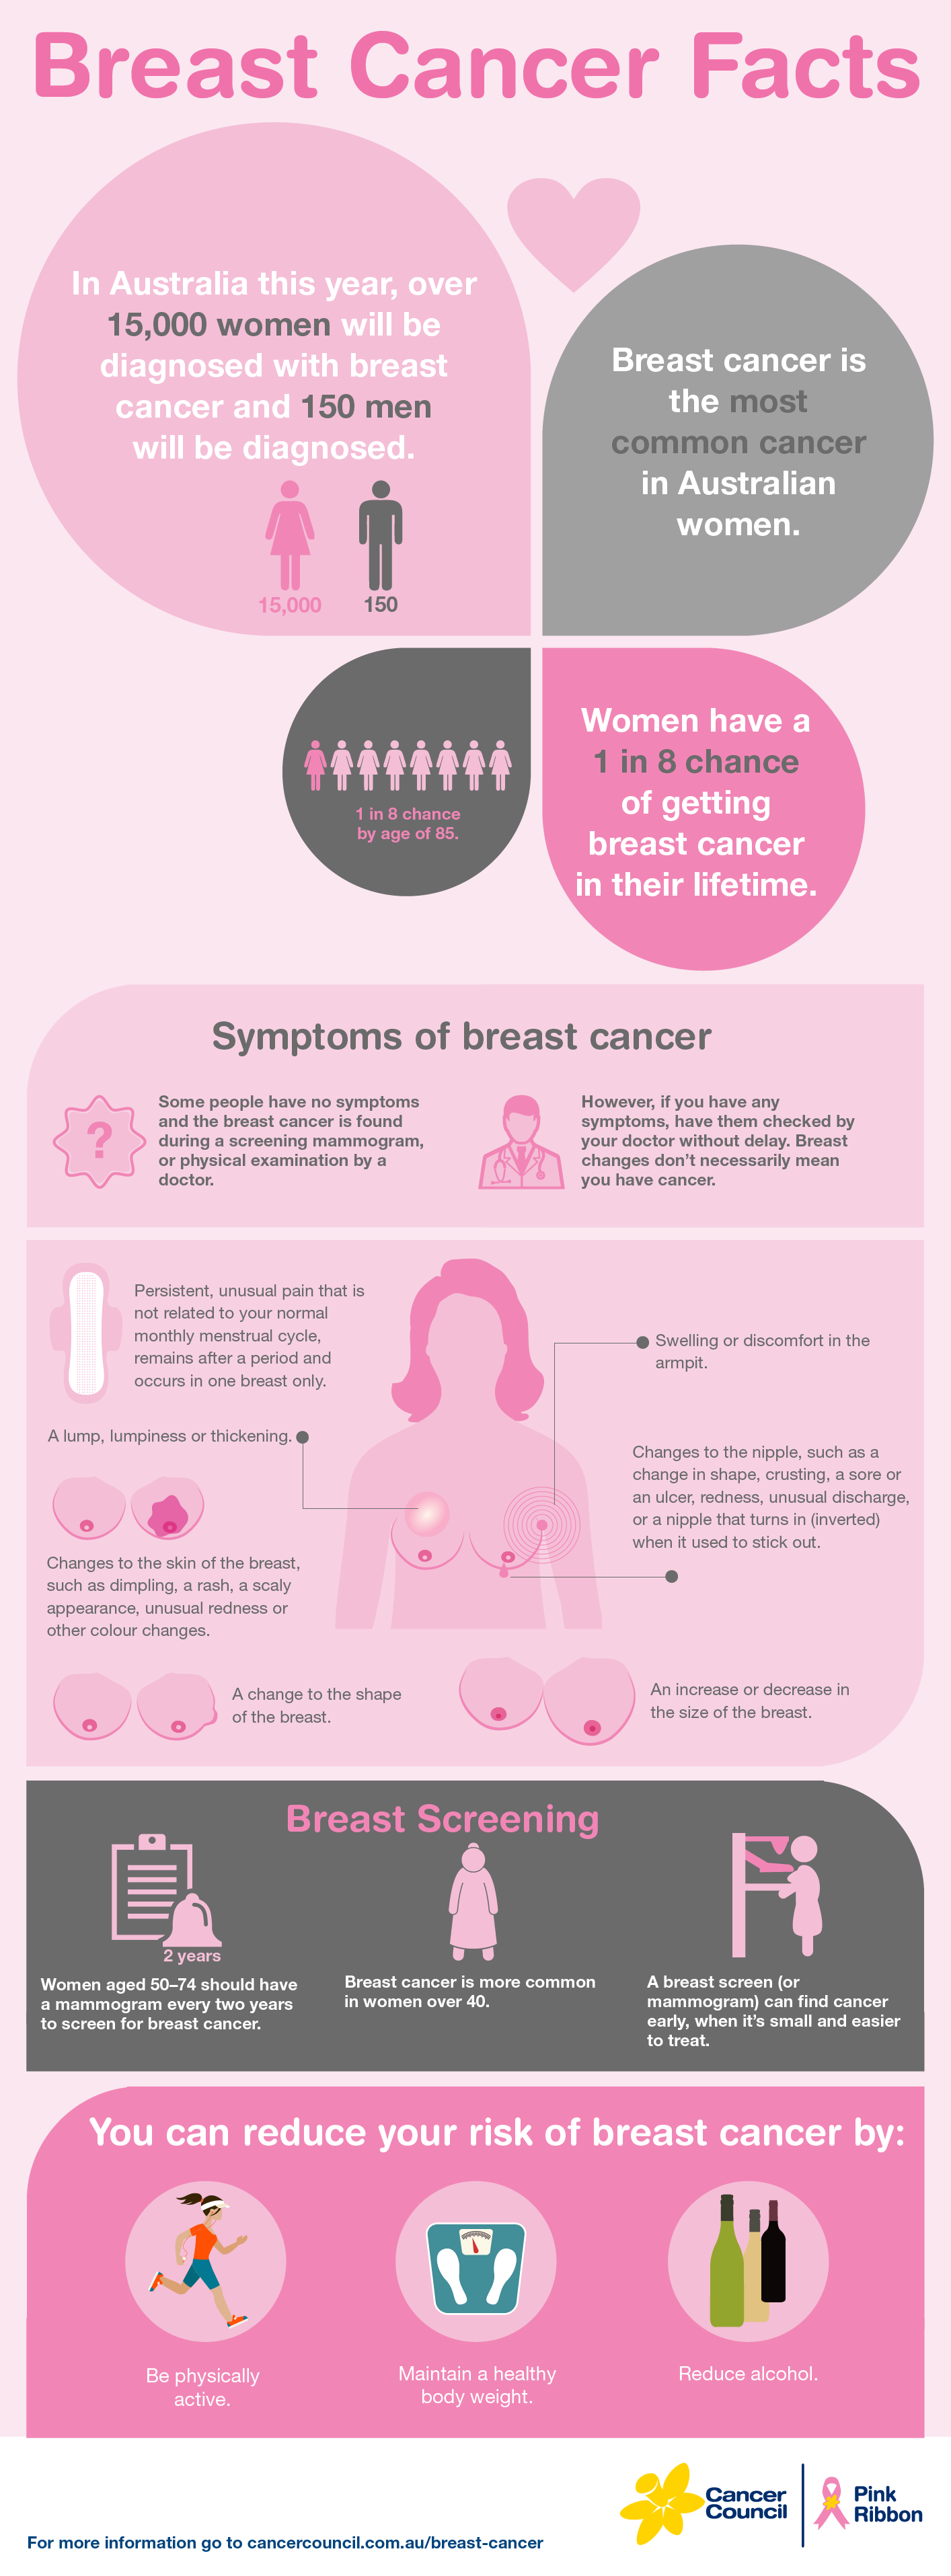 The facts on breast cancer